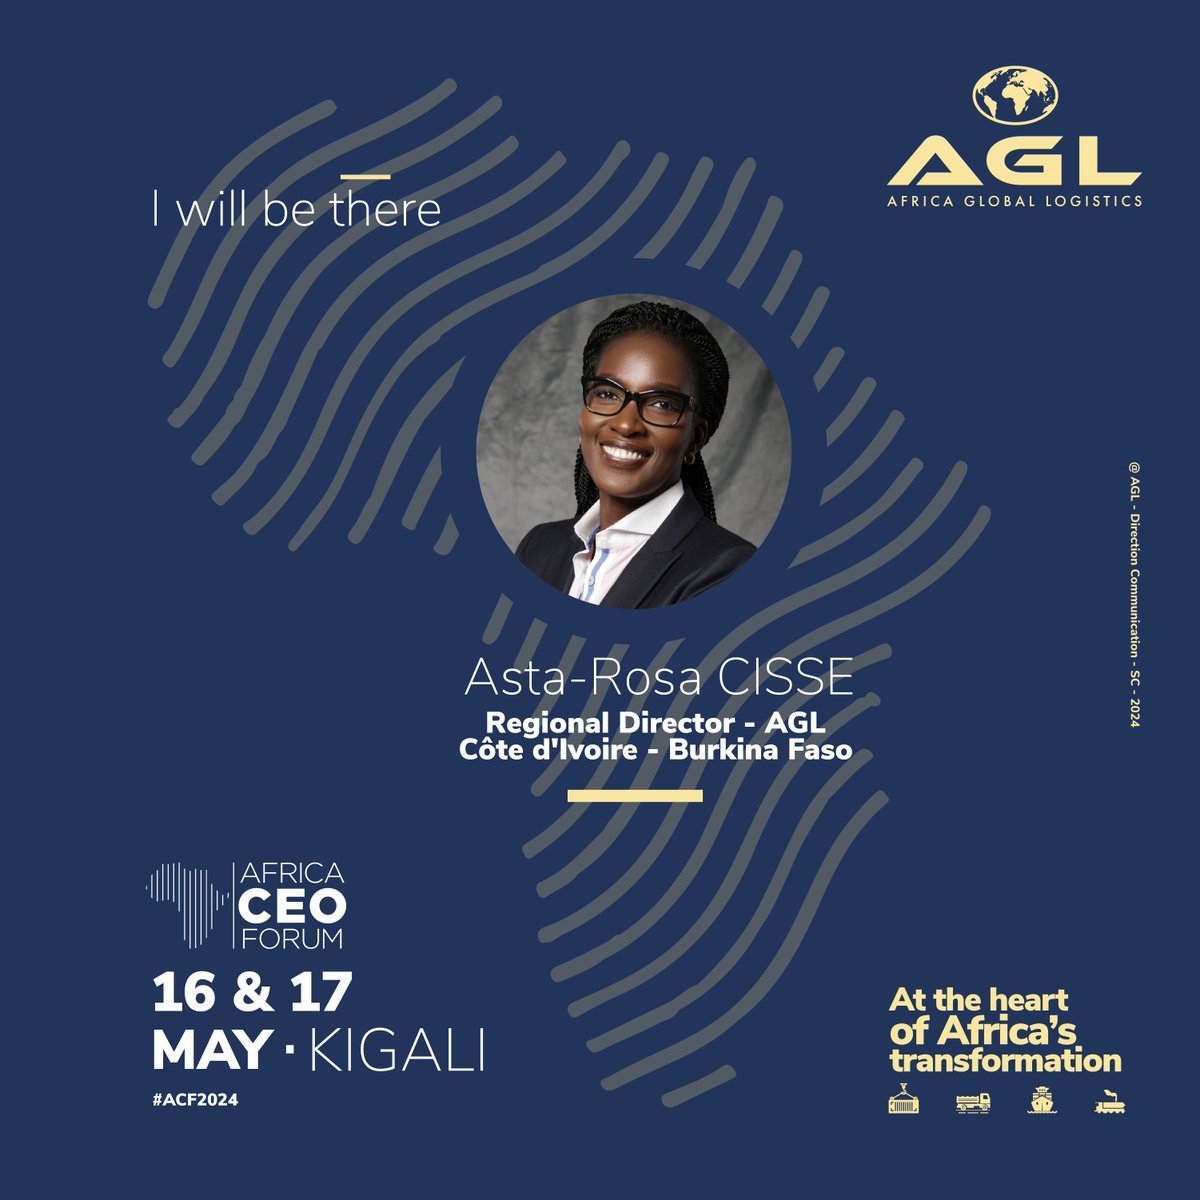 Join Asta-Rosa Cisse, AGL's Regional Director AGL Côte d’Ivoire - Burkina Faso, as she discusses pivotal policies driving digitalization in Africa's logistics sector at the @africaceoforum. 💎 AGL, Diamond partner of #ACF2024 #AGL #AfricaCEOForum #AfricaTransformation